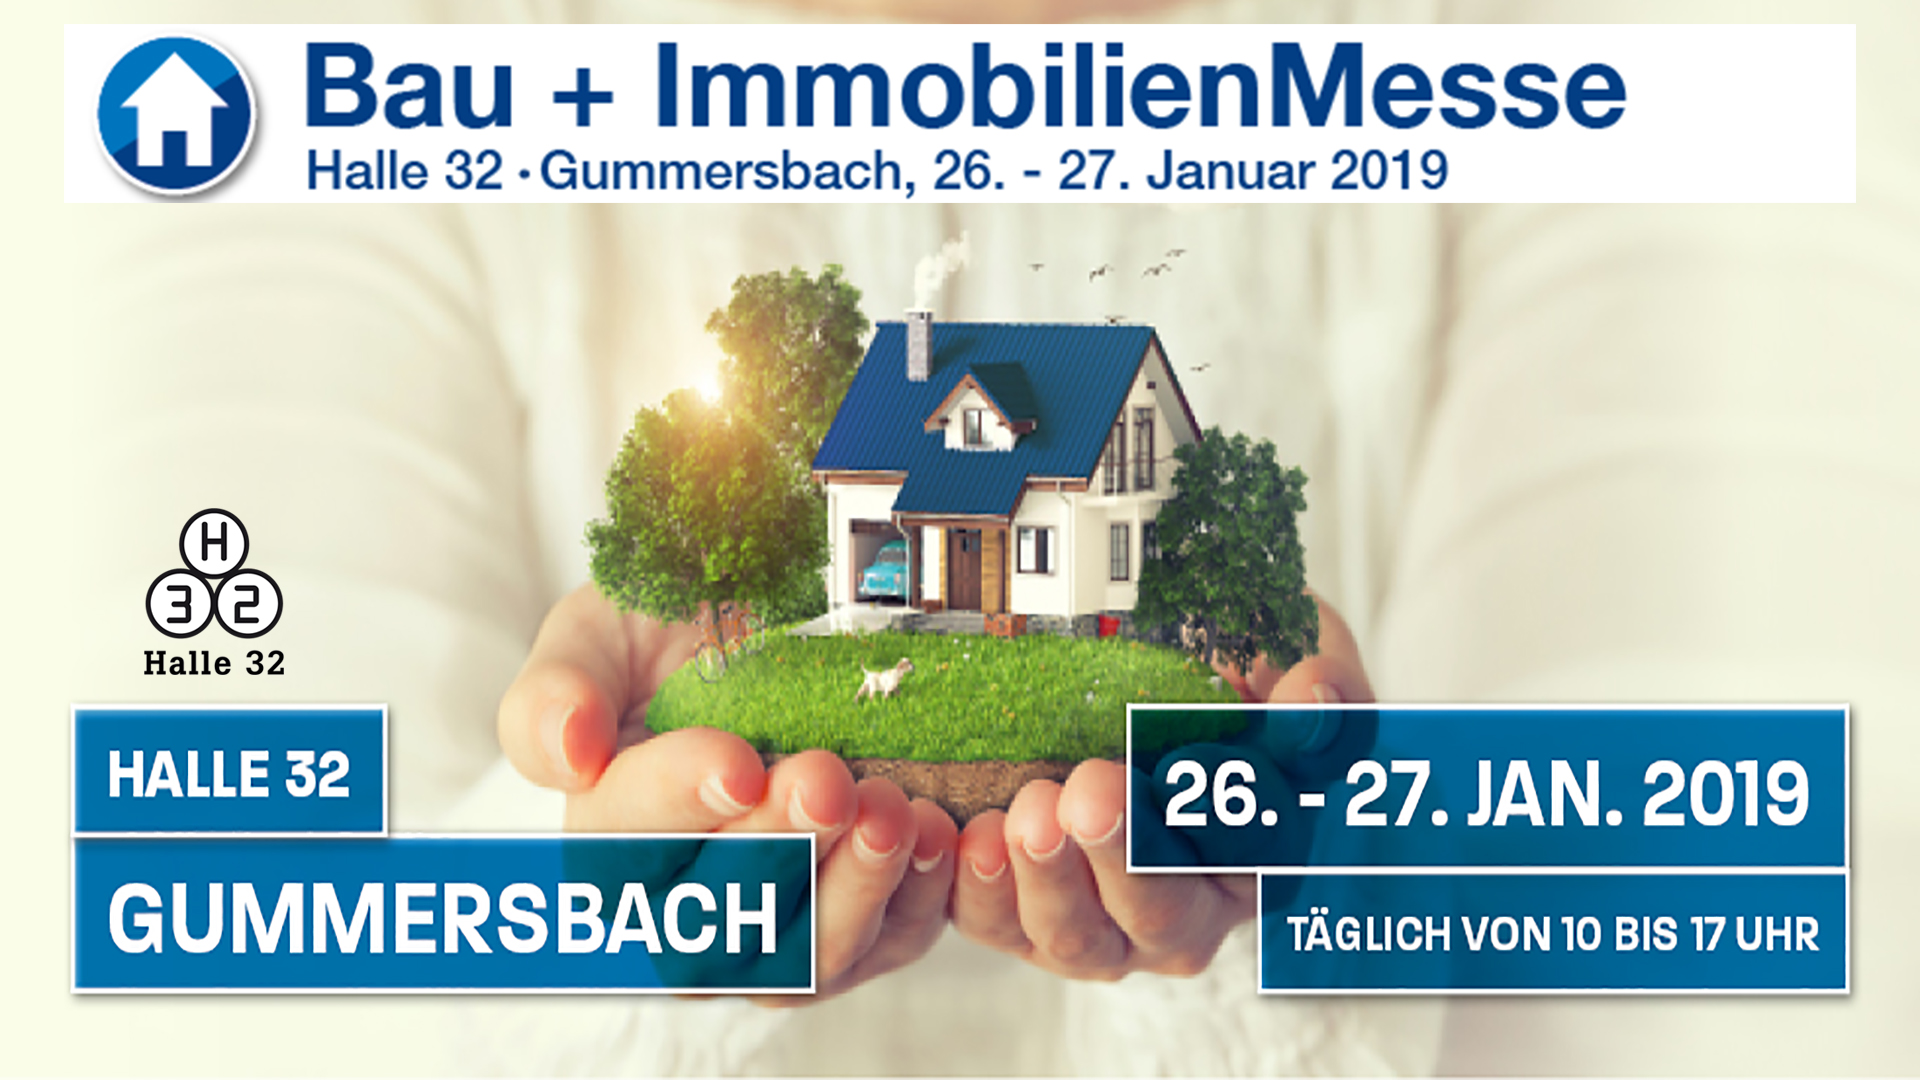 Halle 32 | Bau- + ImmobilienMesse 2019